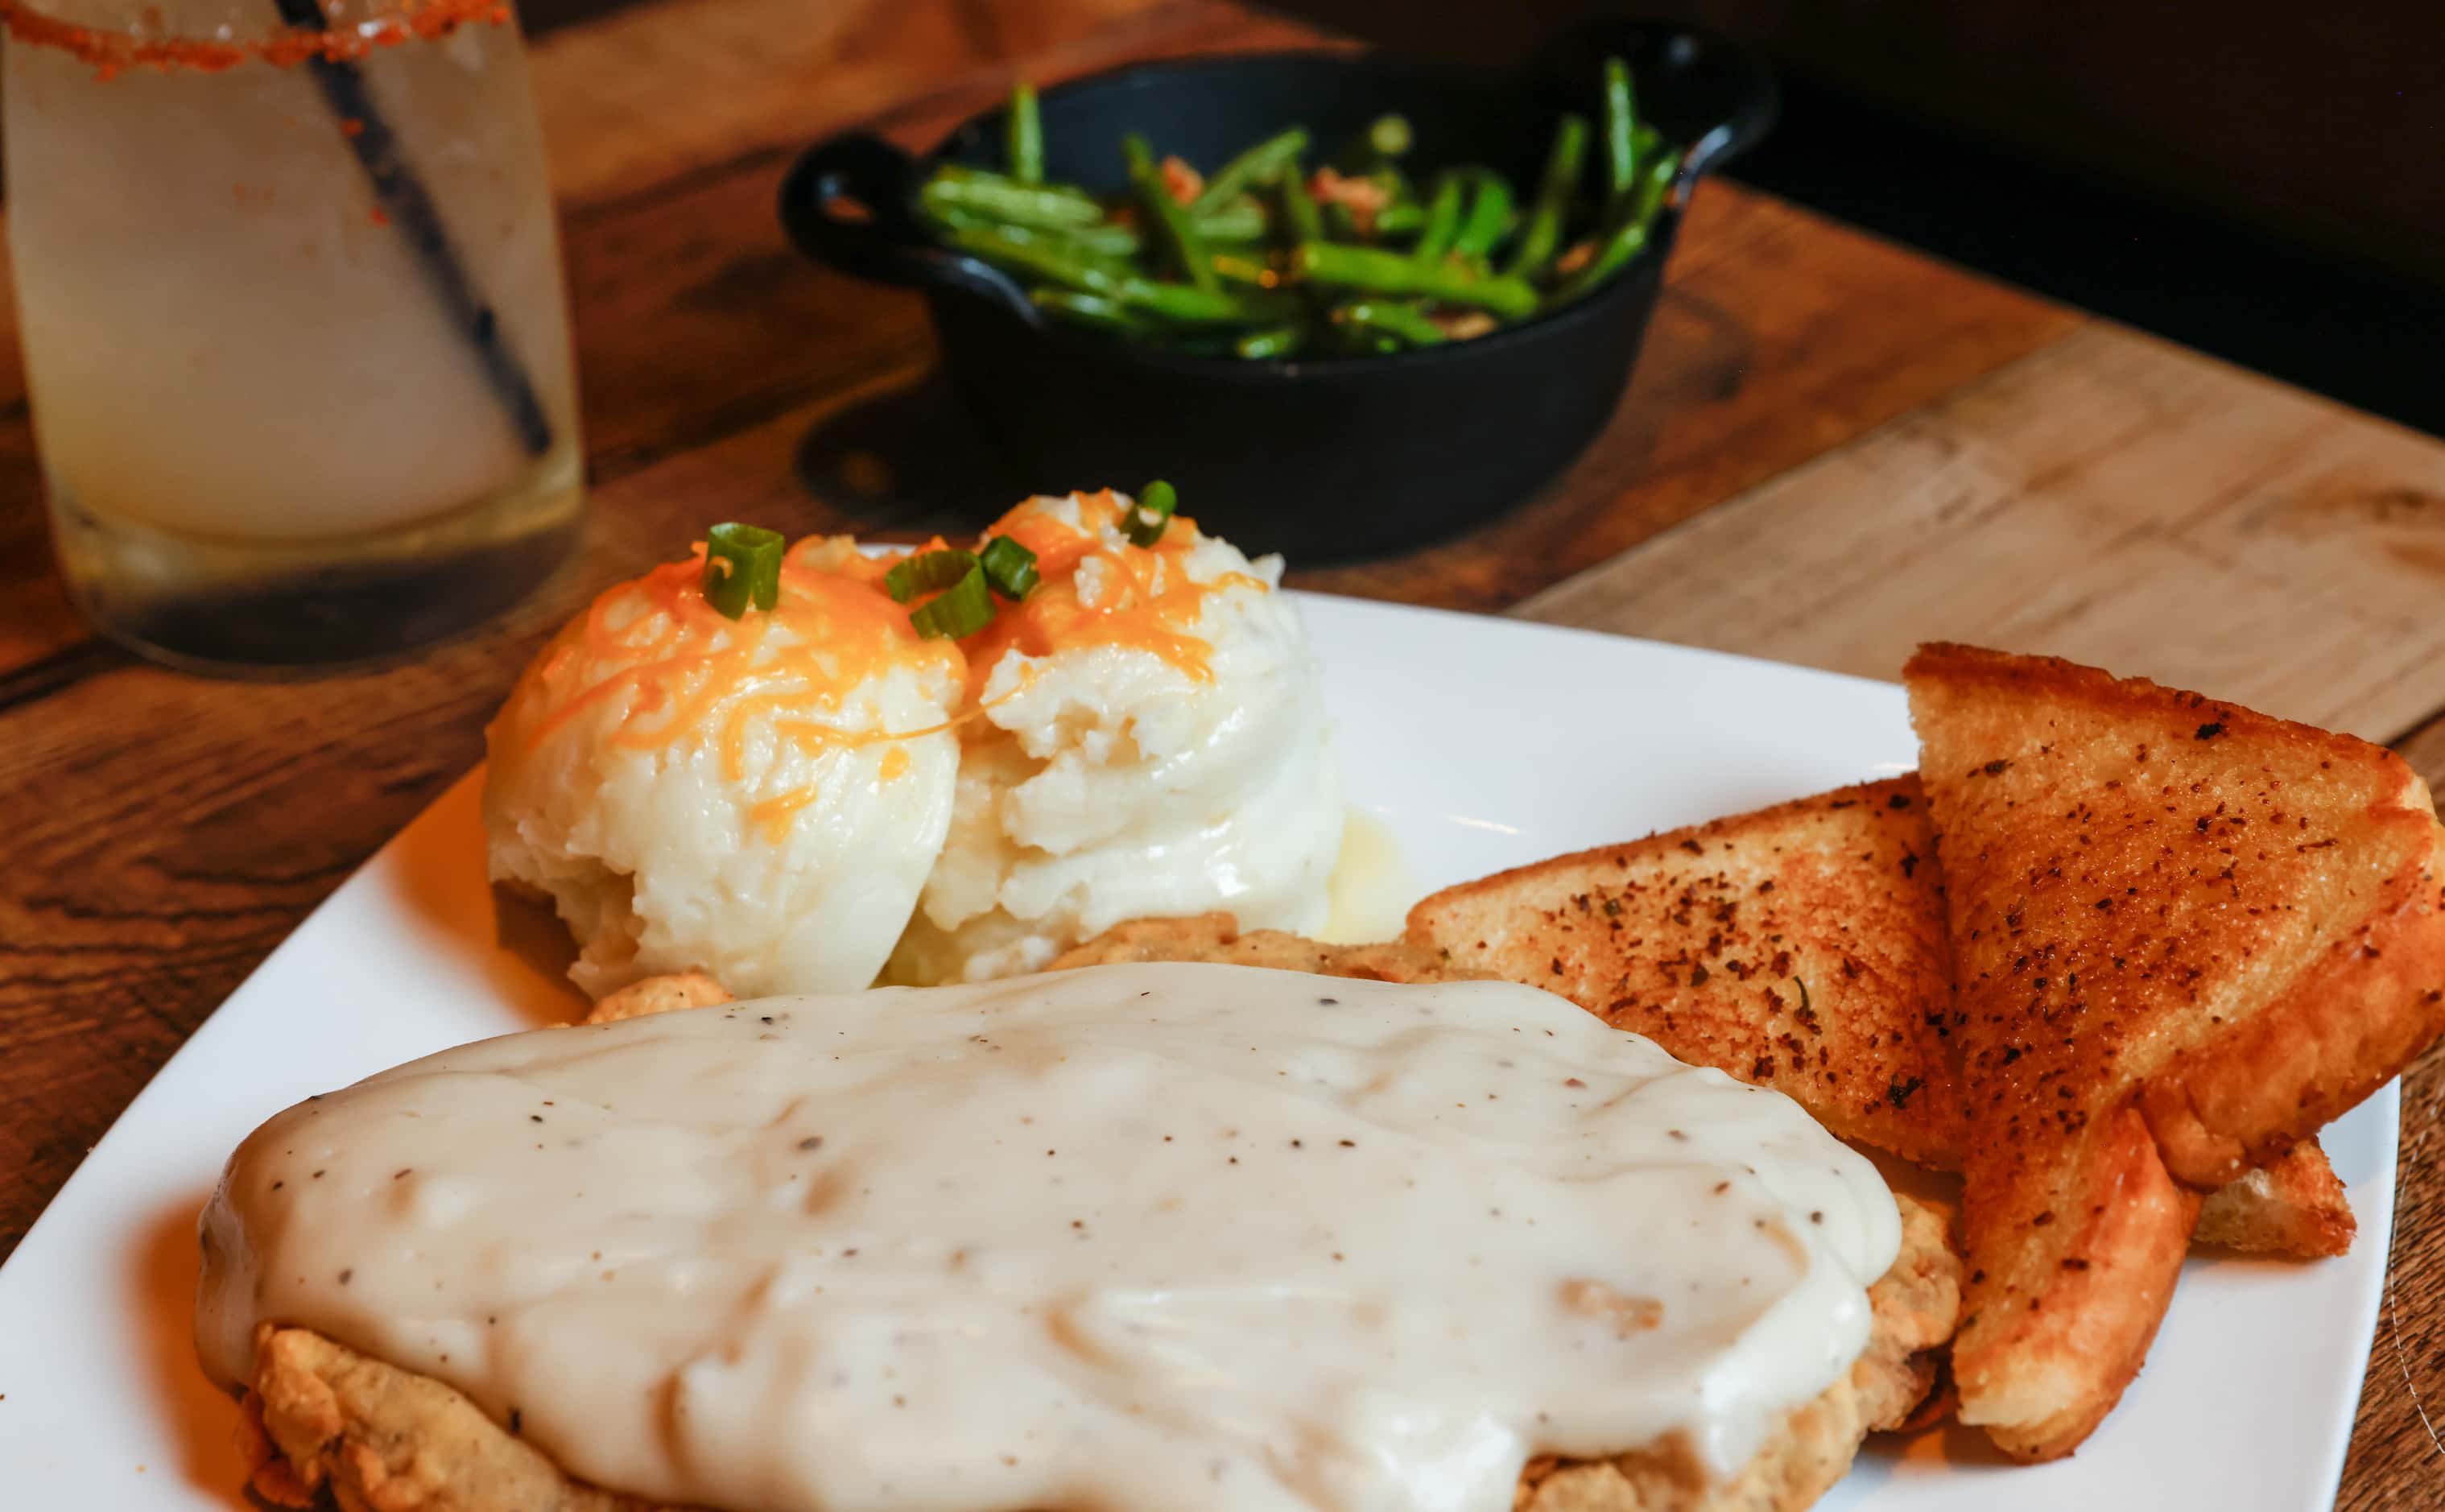 Kuntry & Wistern Fried Steak is served with mashed potatoes and bacon-sauteed green beans at...